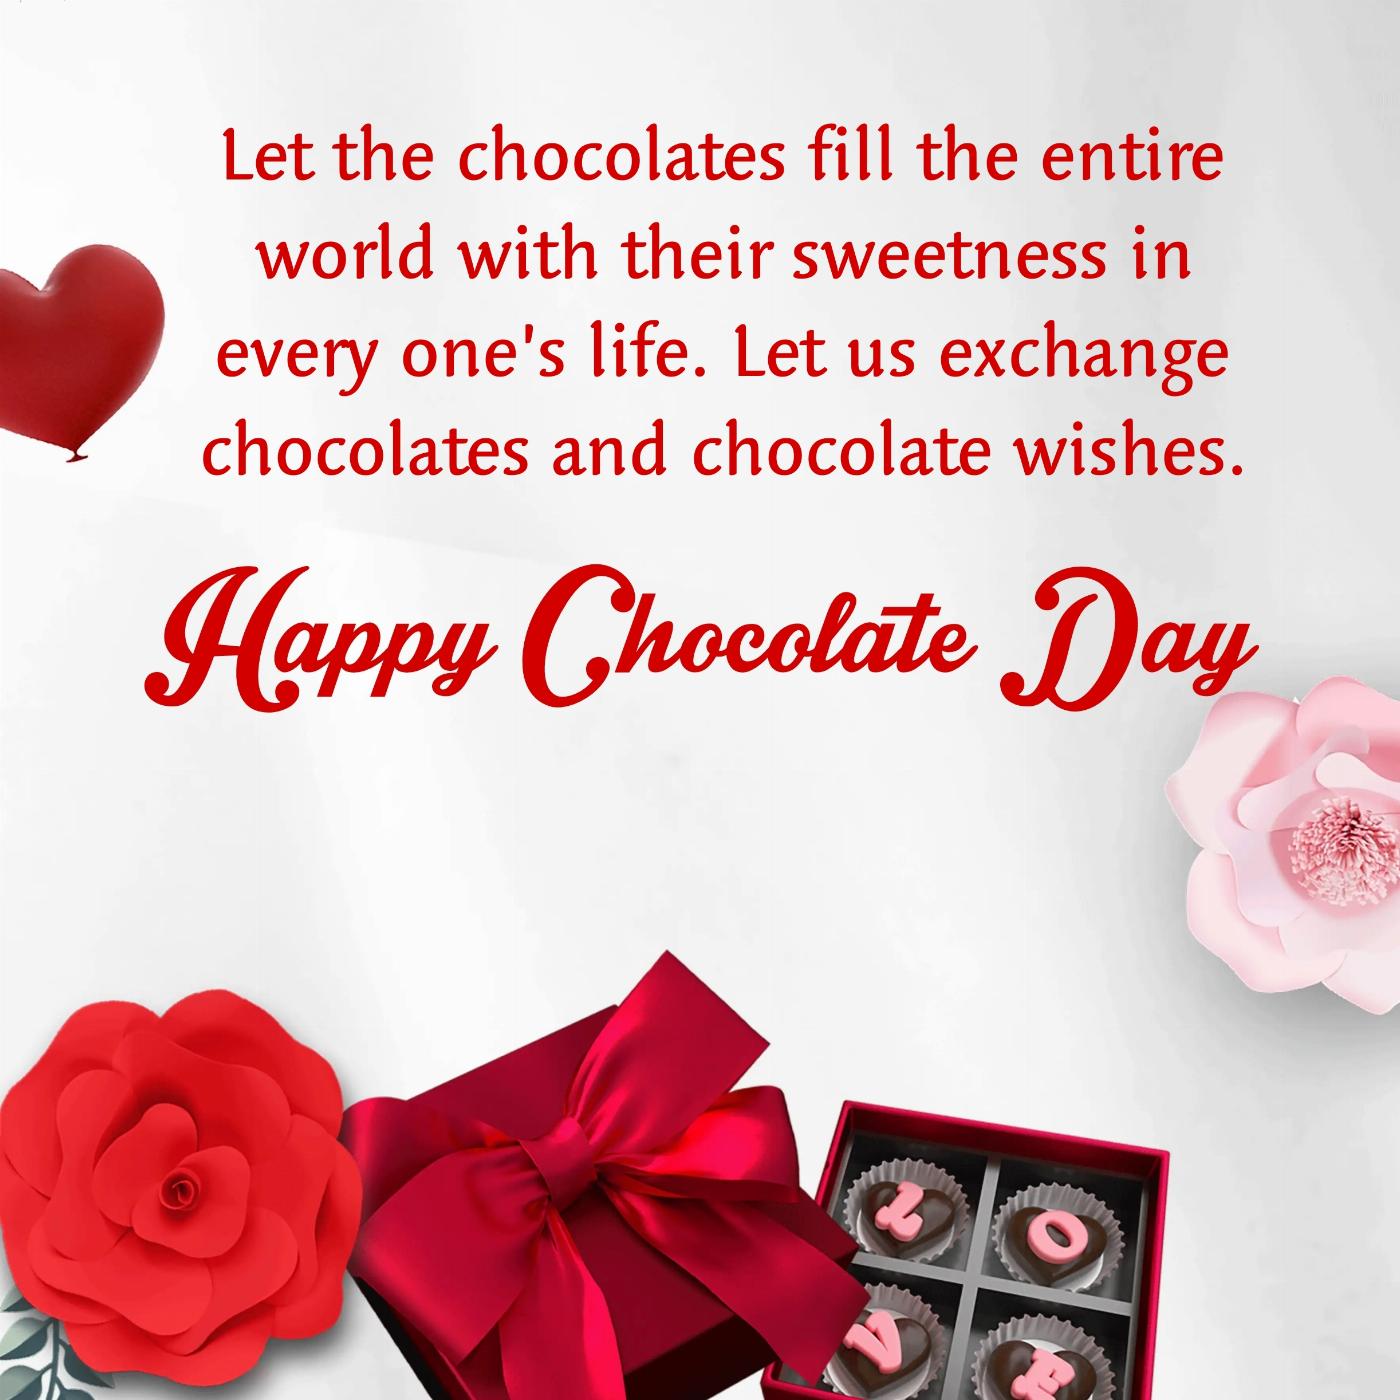 Let the chocolates fill the entire world with their sweetness